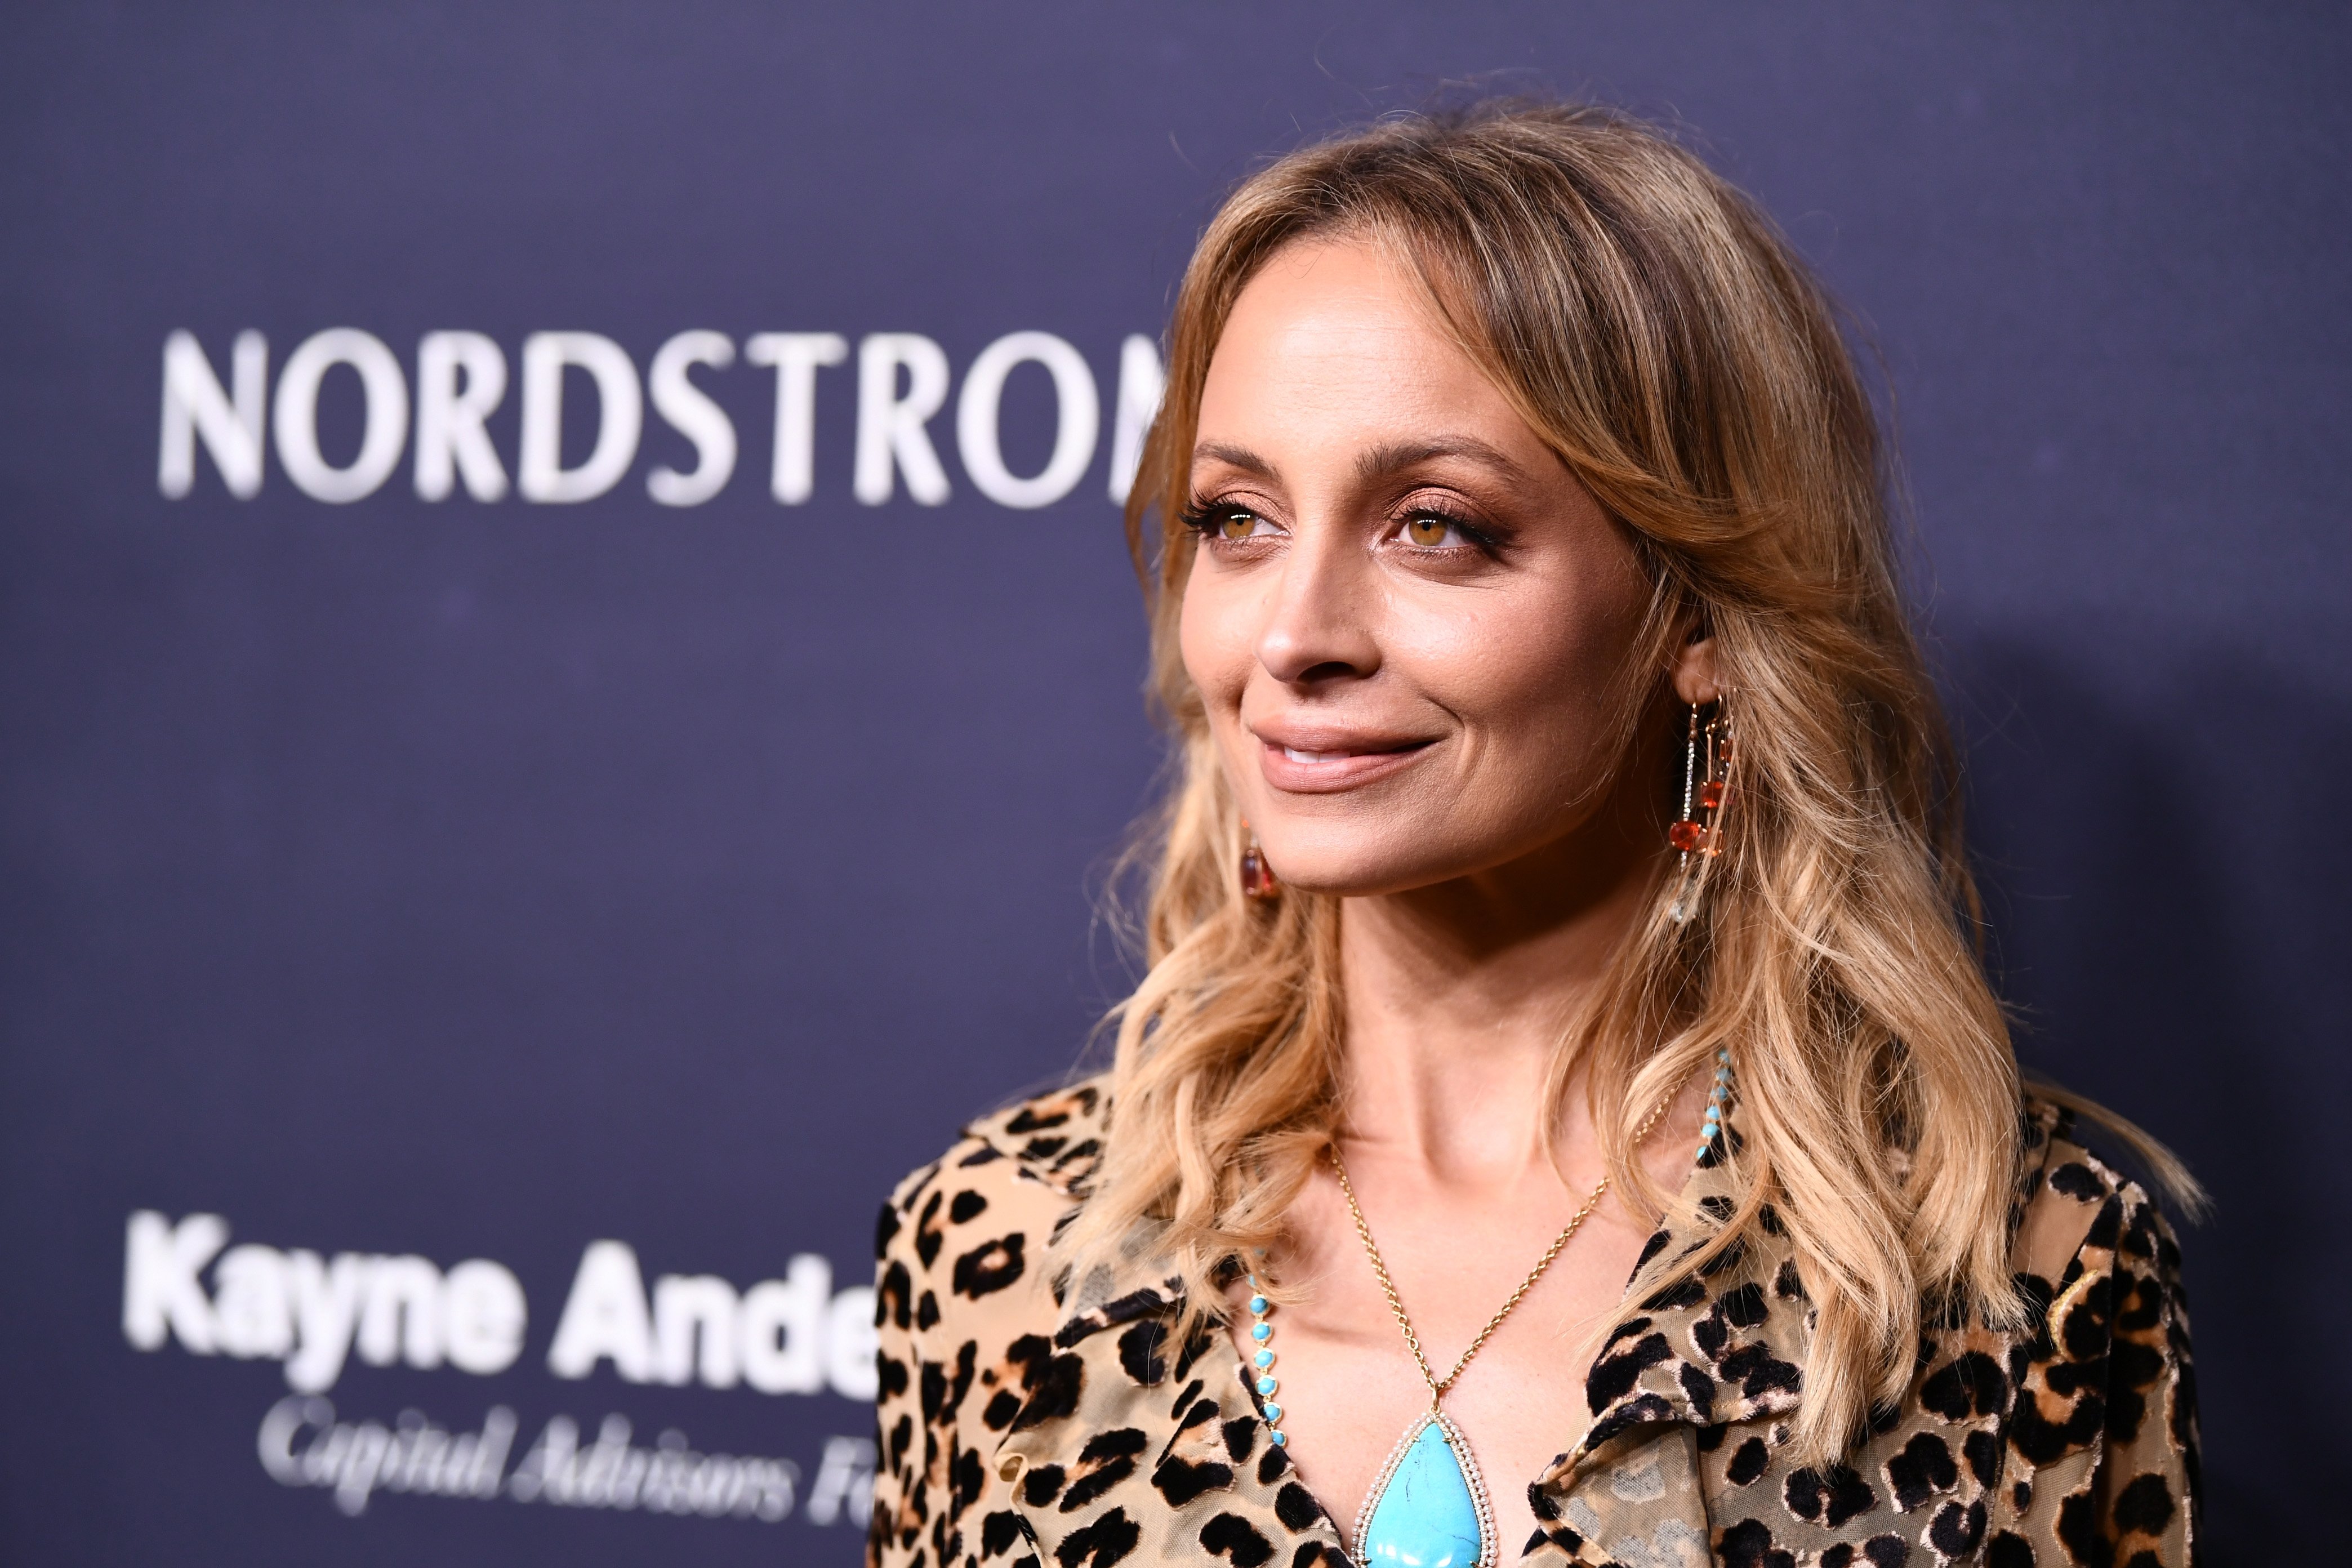  Nicole Richie attends the 2017 Baby2Baby Gala at 3LABS on November 11, 2017 in Culver City, California. | Photo: GettyImages